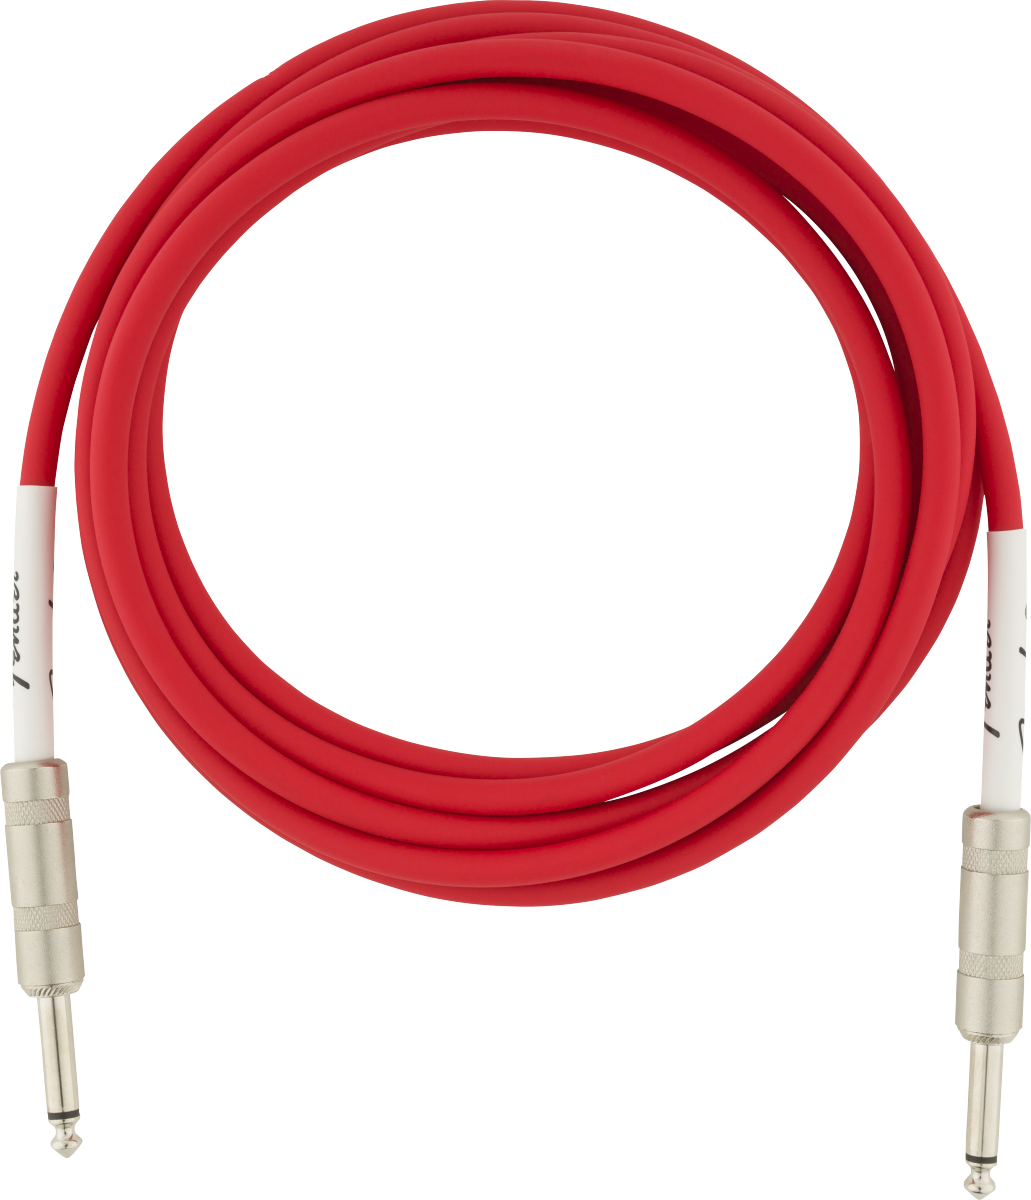 Fender 0990510010 Original Series Straight to Straight Instrument Cable - 10 foot Fiesta Red